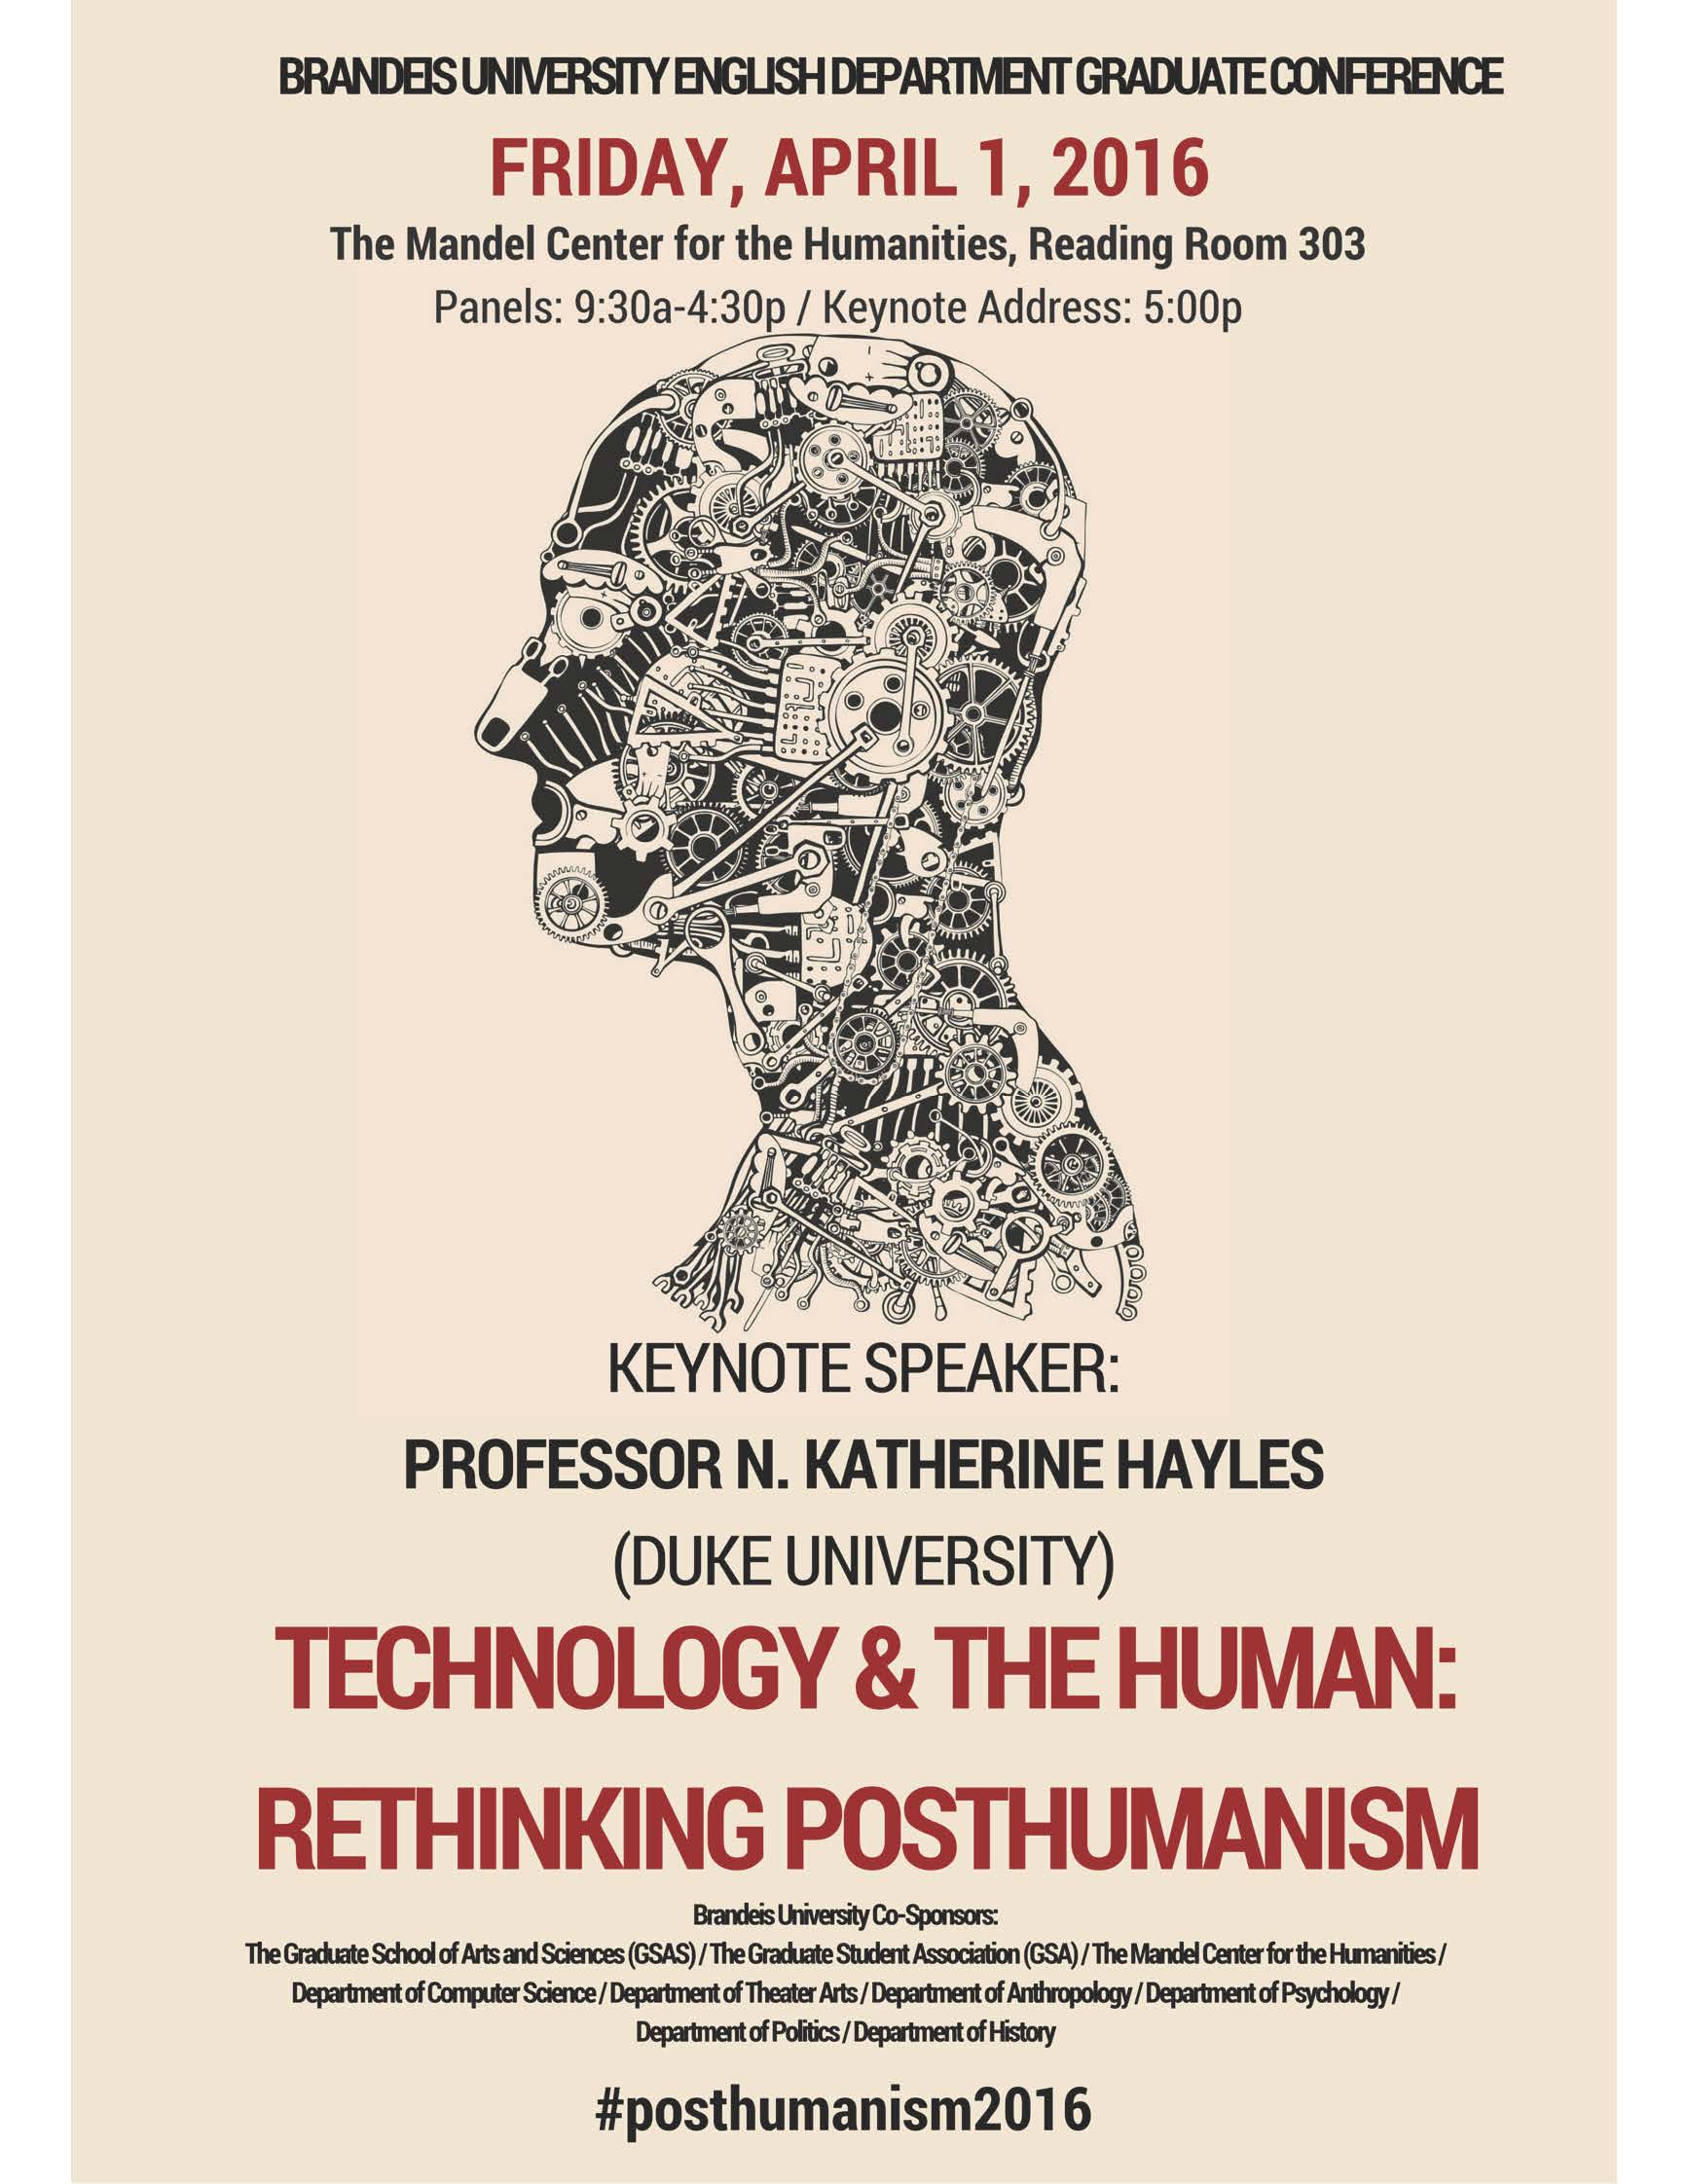 Technology & the Human: Rethinking Posthumanism at Brandeis on April 1st